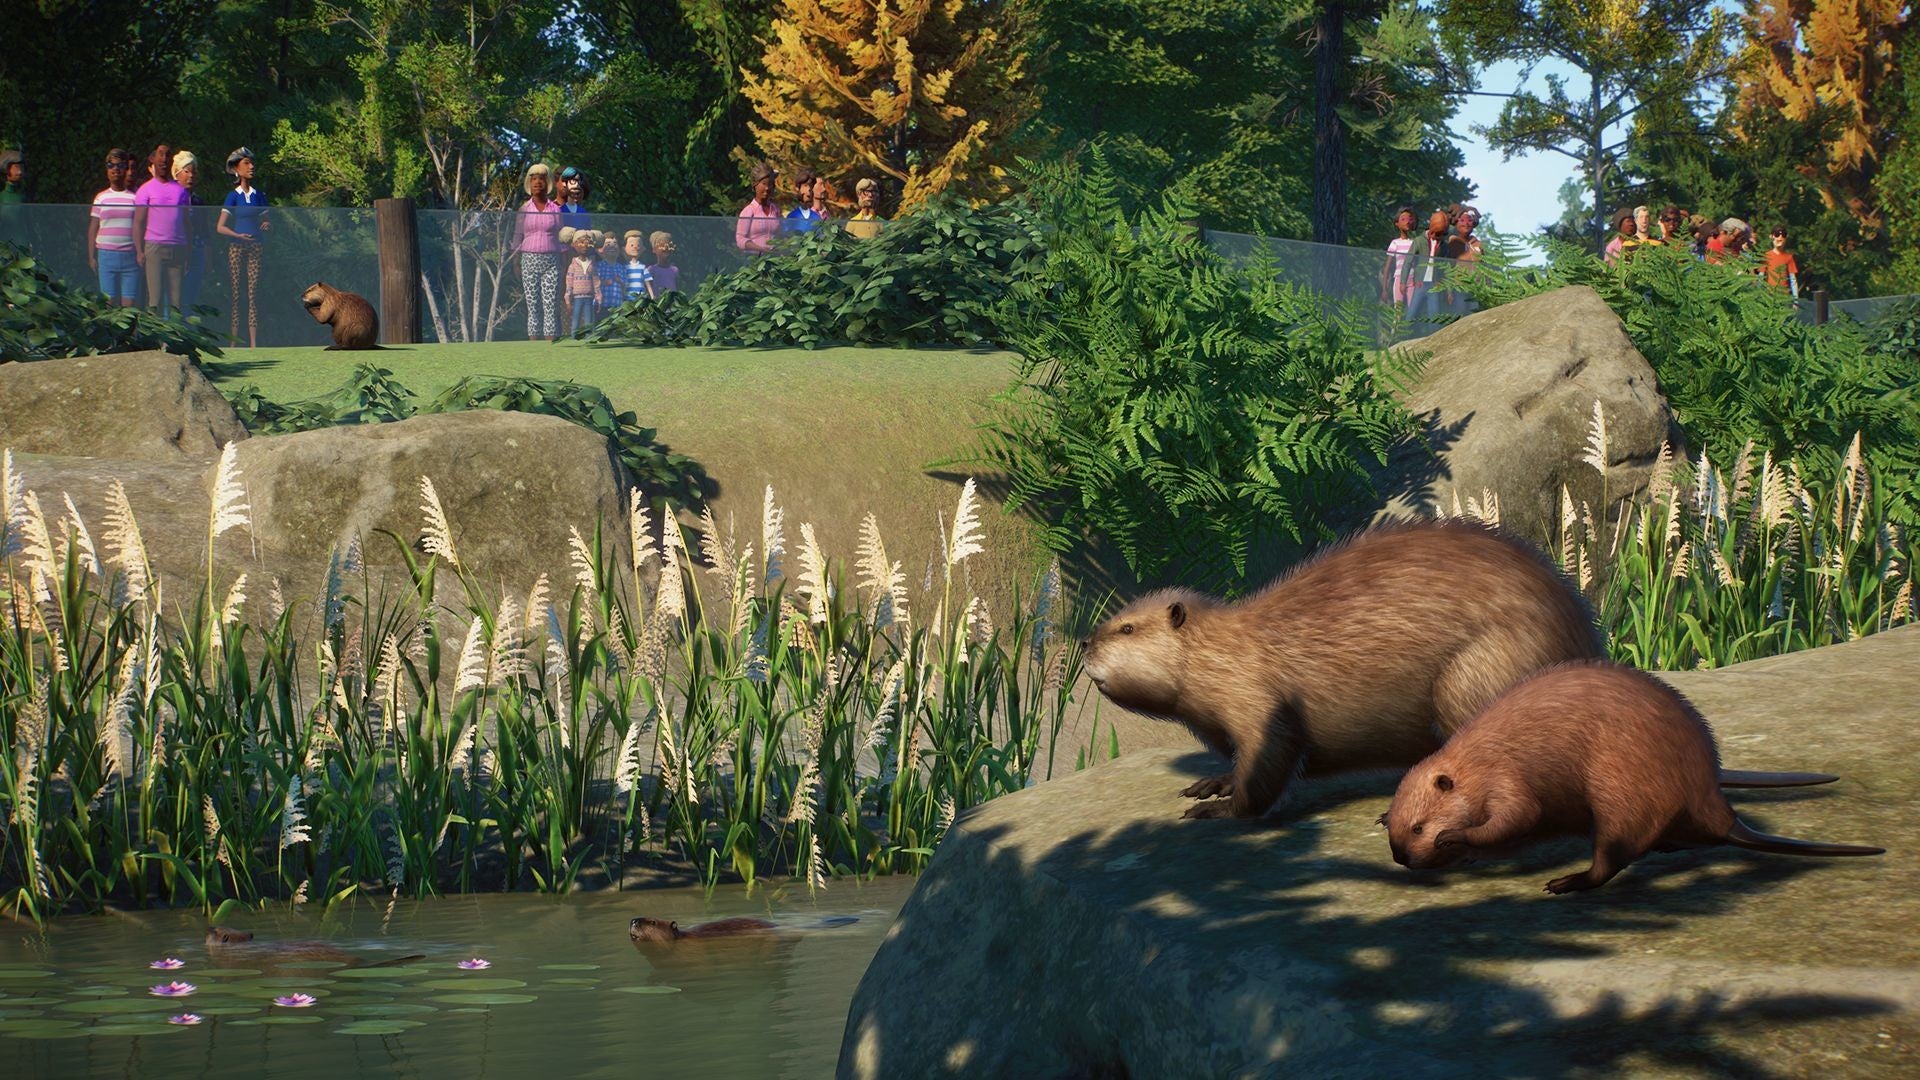 Planet Zoo: North American Animal Pack DLC